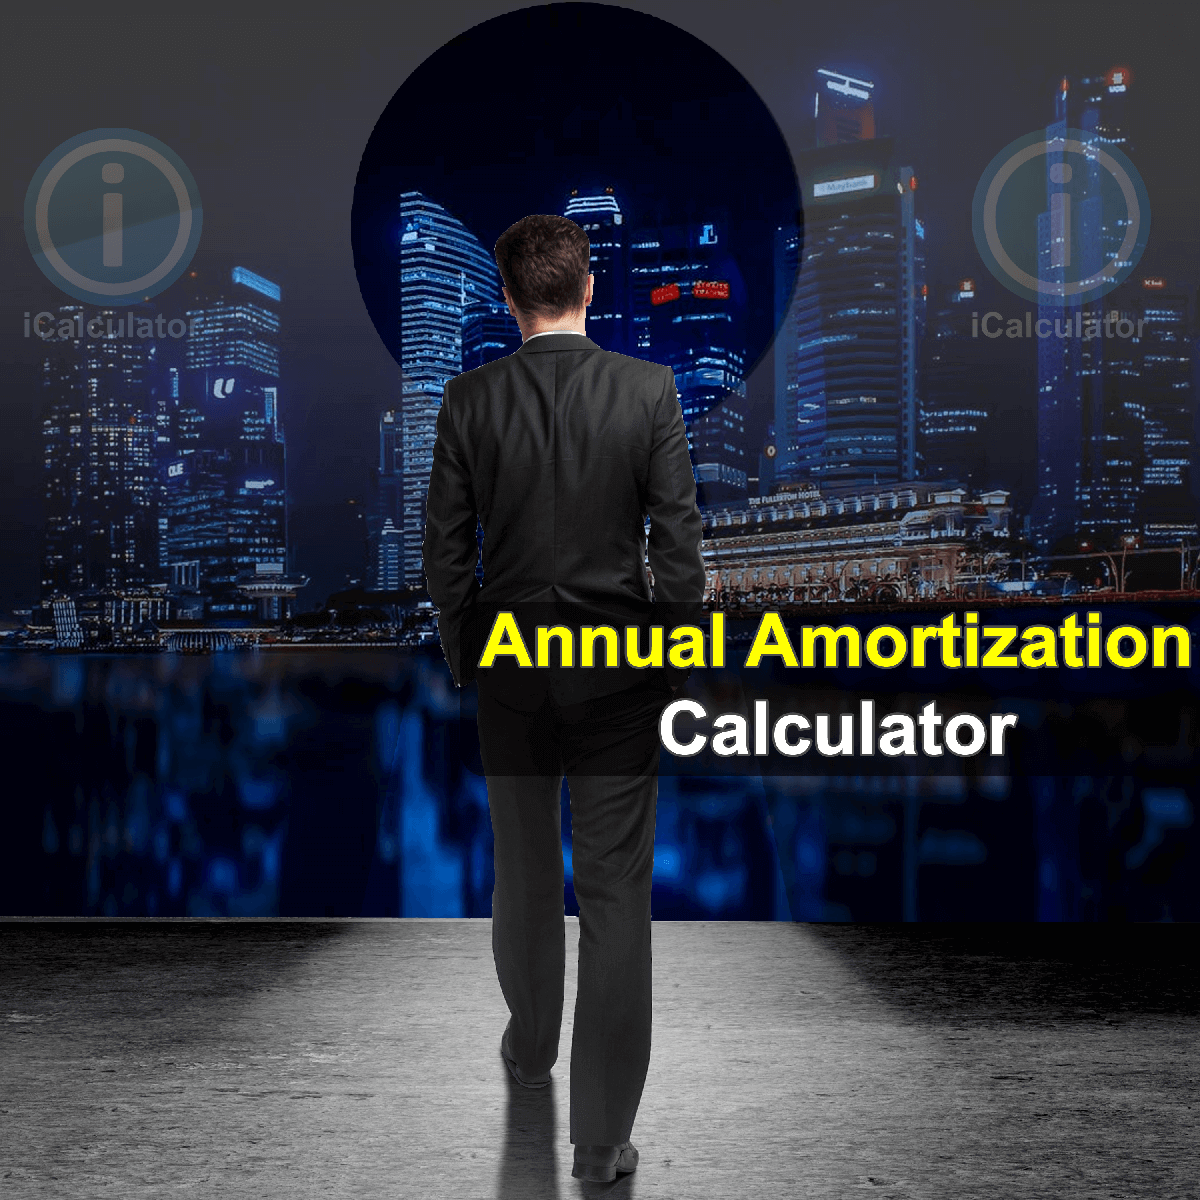 Annual Amortization Calculator. This image provides details of how to calculate annual amortization using a calculator and notepad. By using the annual amortization formula, the Annual Amortization Calculator provides a true calculation of the monthly repayments and the amount of interest from borrowing or investing using amortization formula on an annual basis